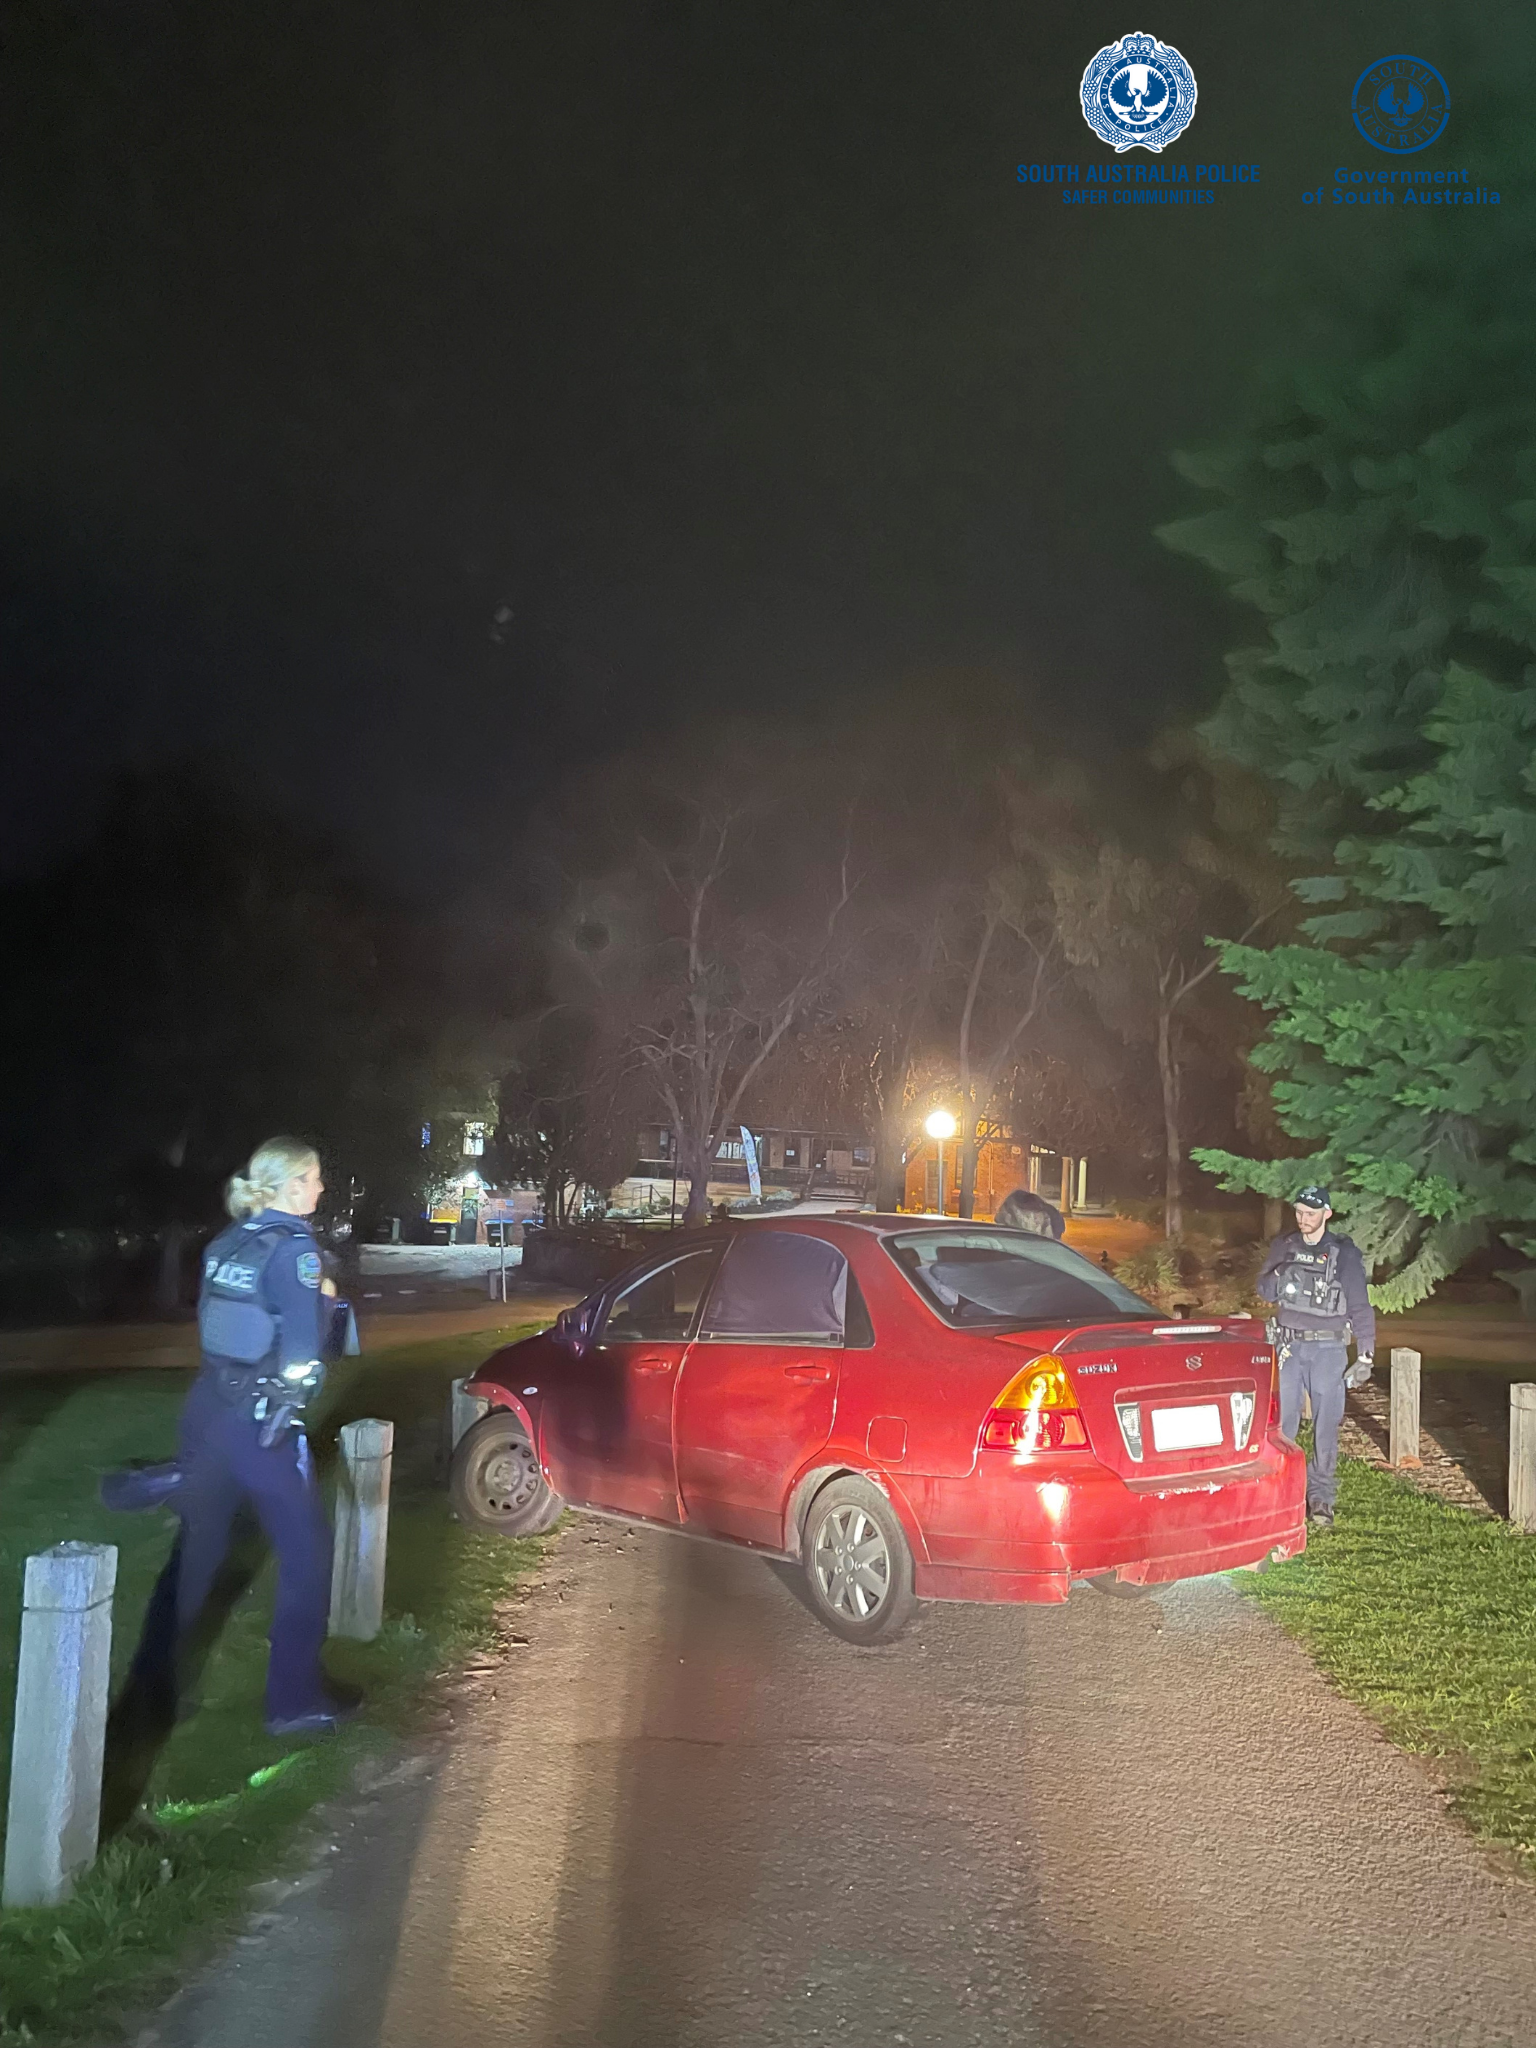 Drink driver crashes at golf course